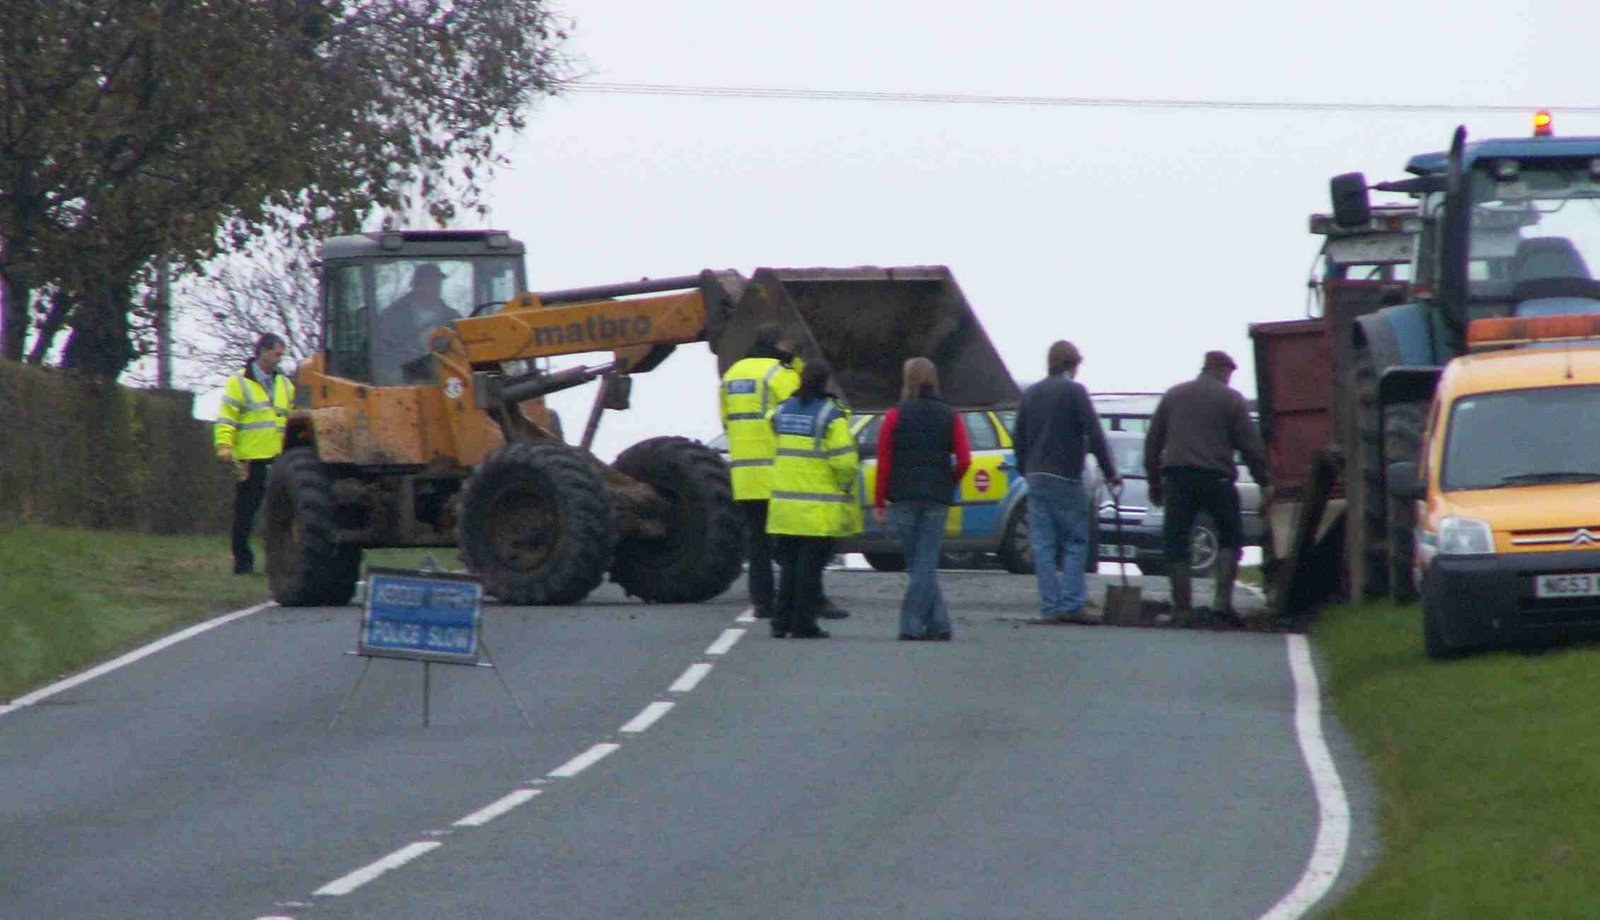 [penyffordd_district_tractor_accident_1a.jpg]